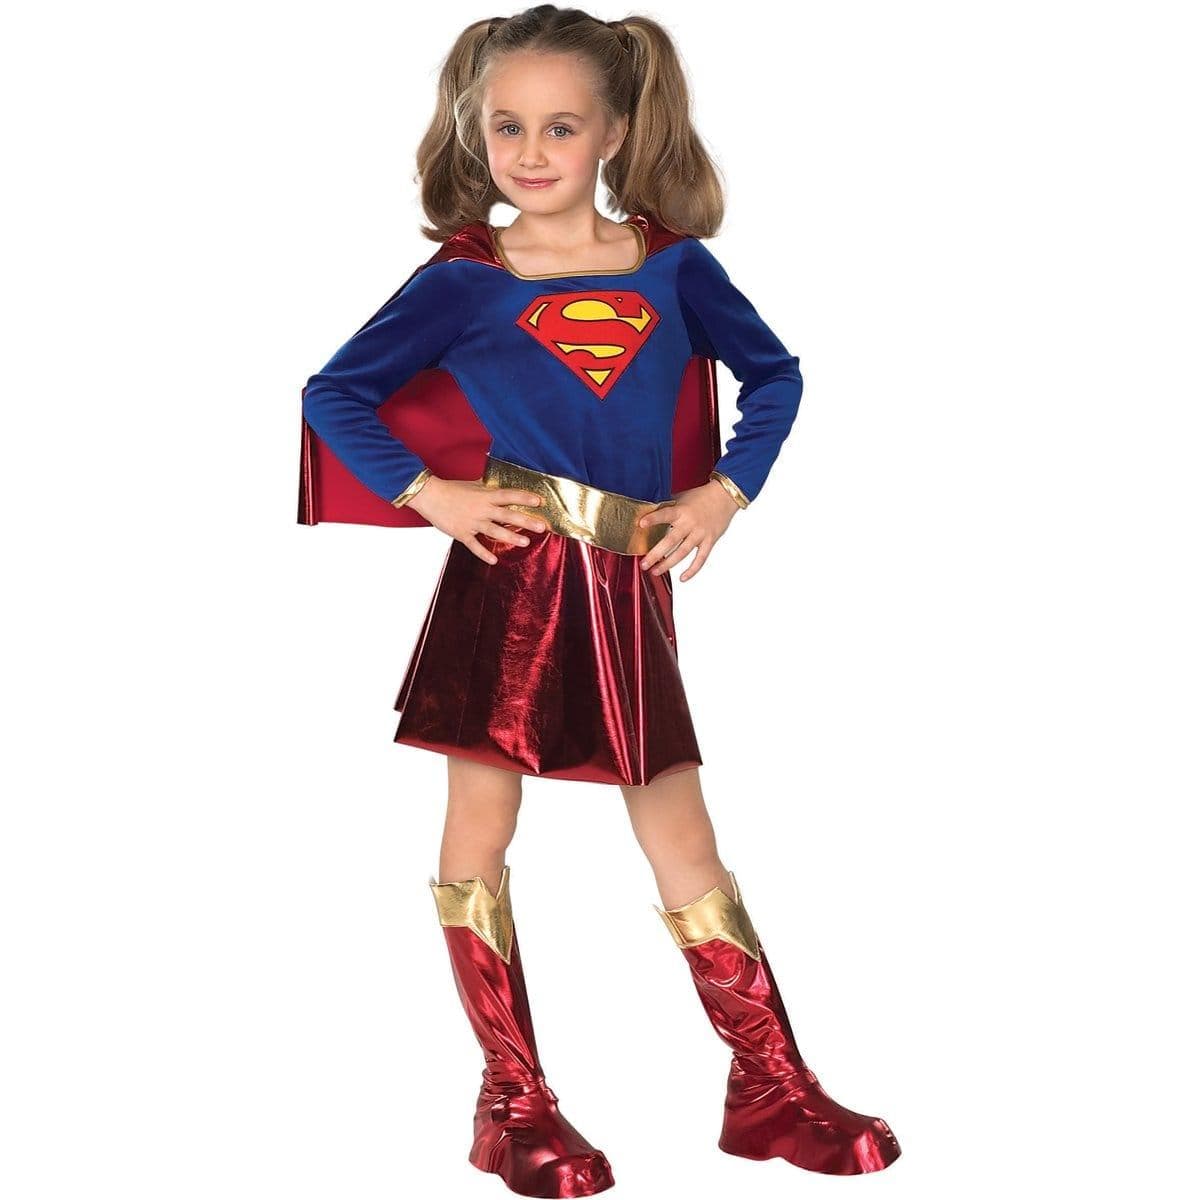 Buy Costumes Supergirl Deluxe Costume for Kids, Supergirl sold at Party Expert